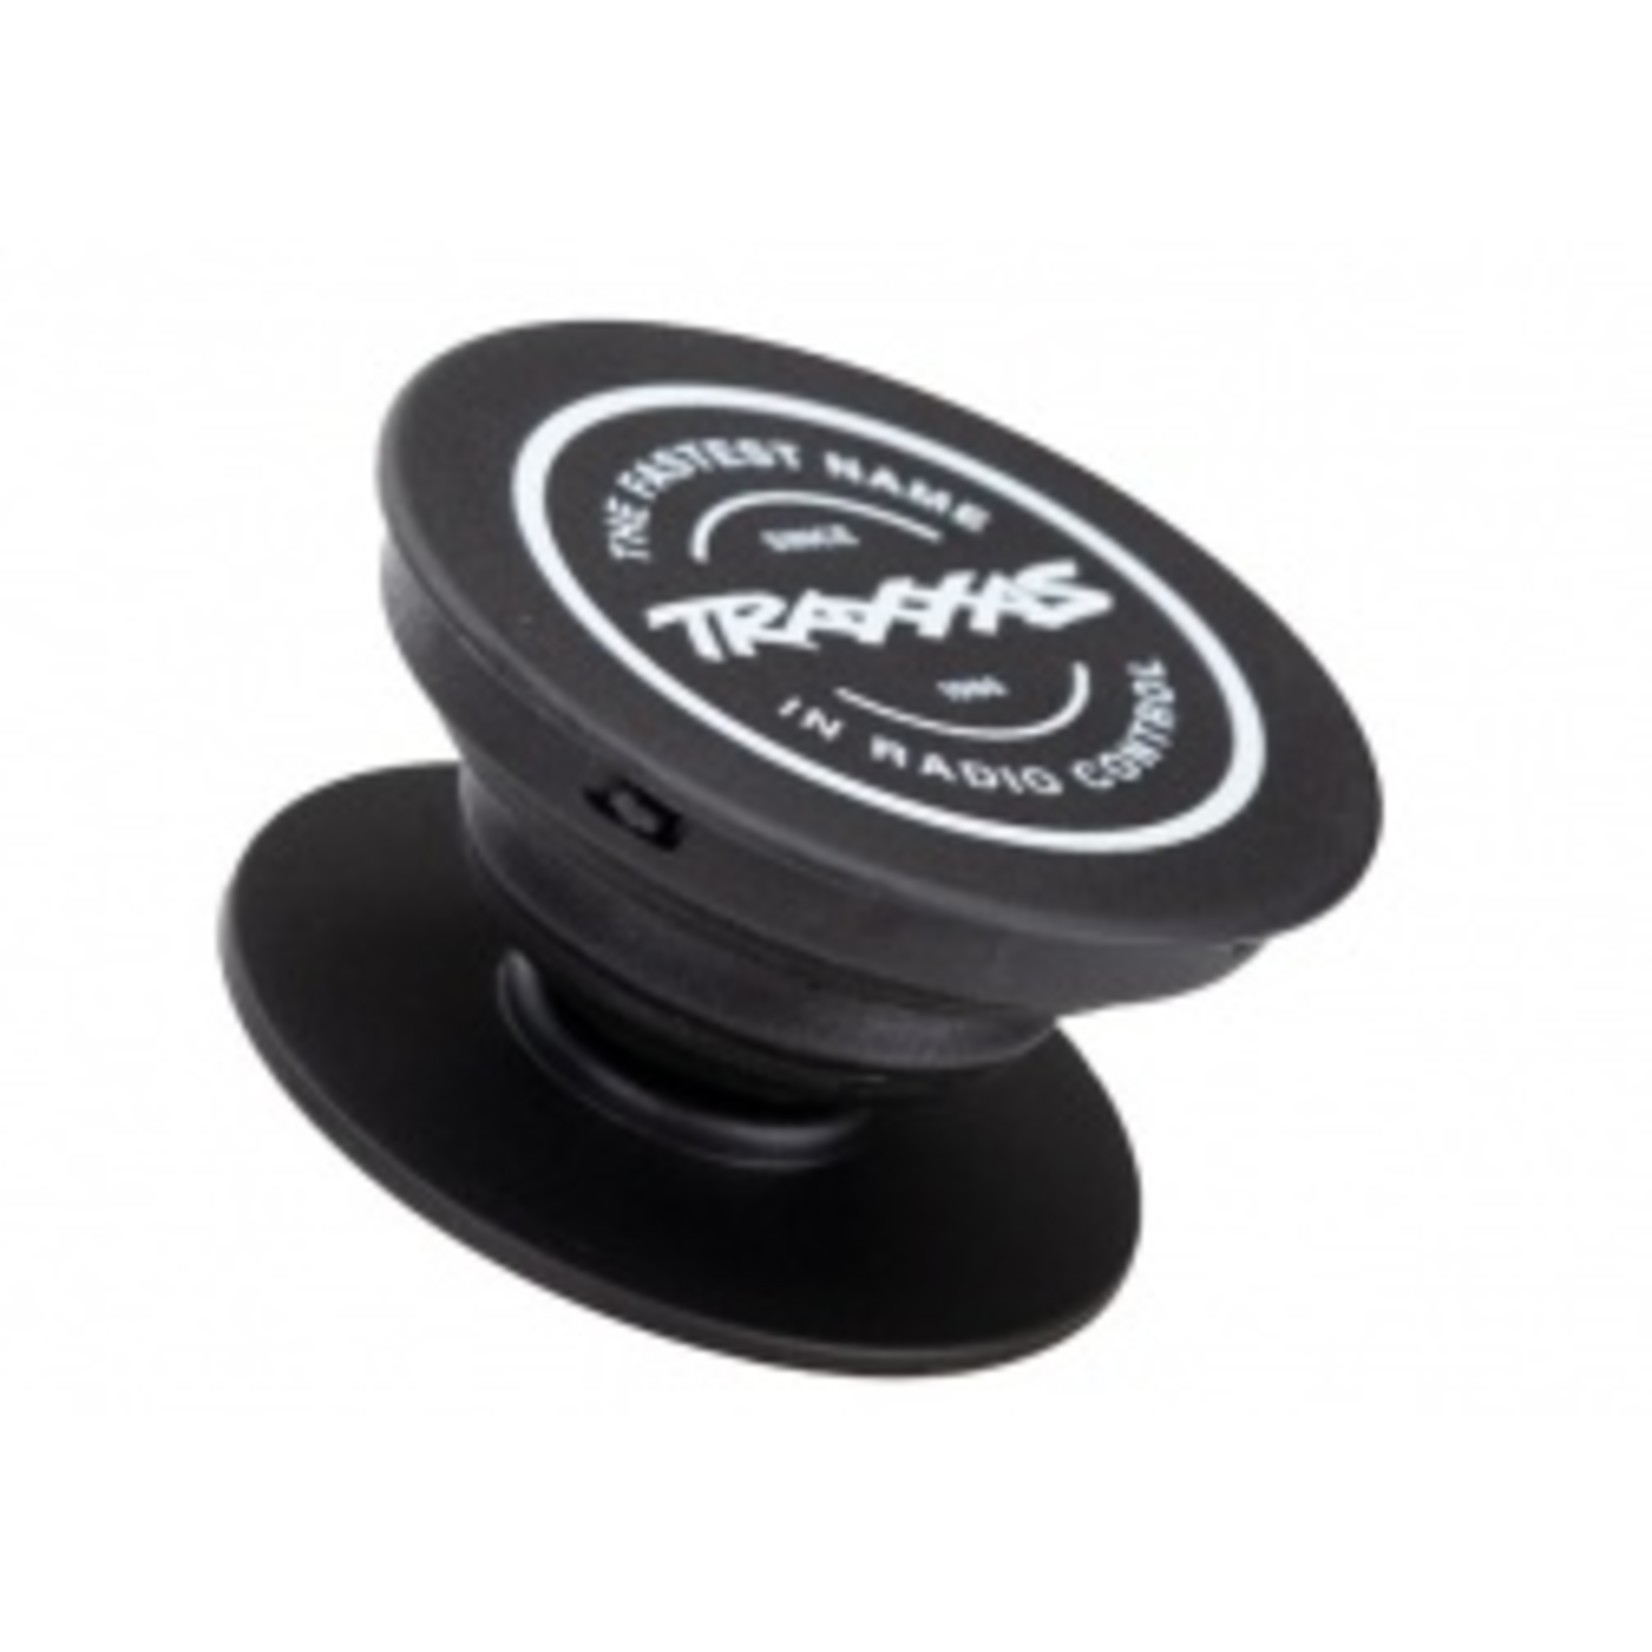 Traxxas Expand And Stand Phone Grip